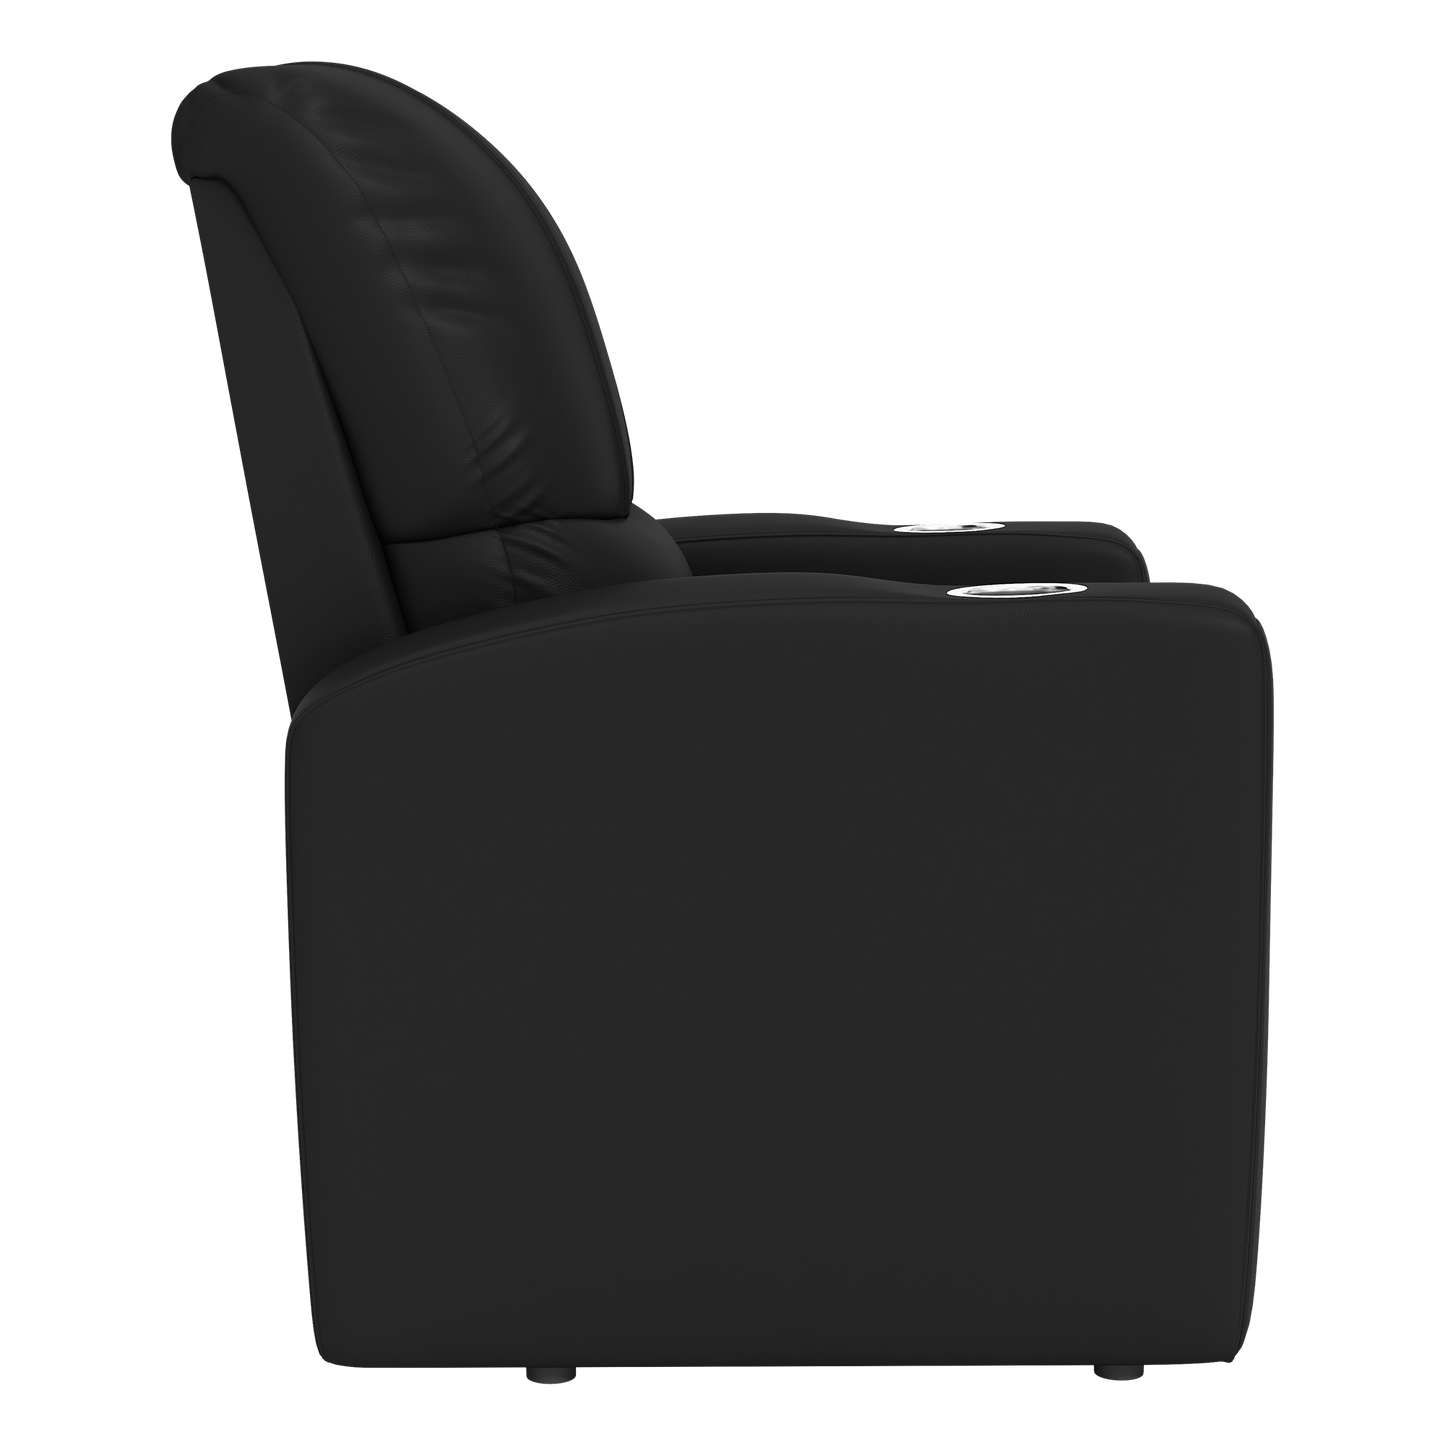 Stealth Recliner with Golden State Warriors Logo